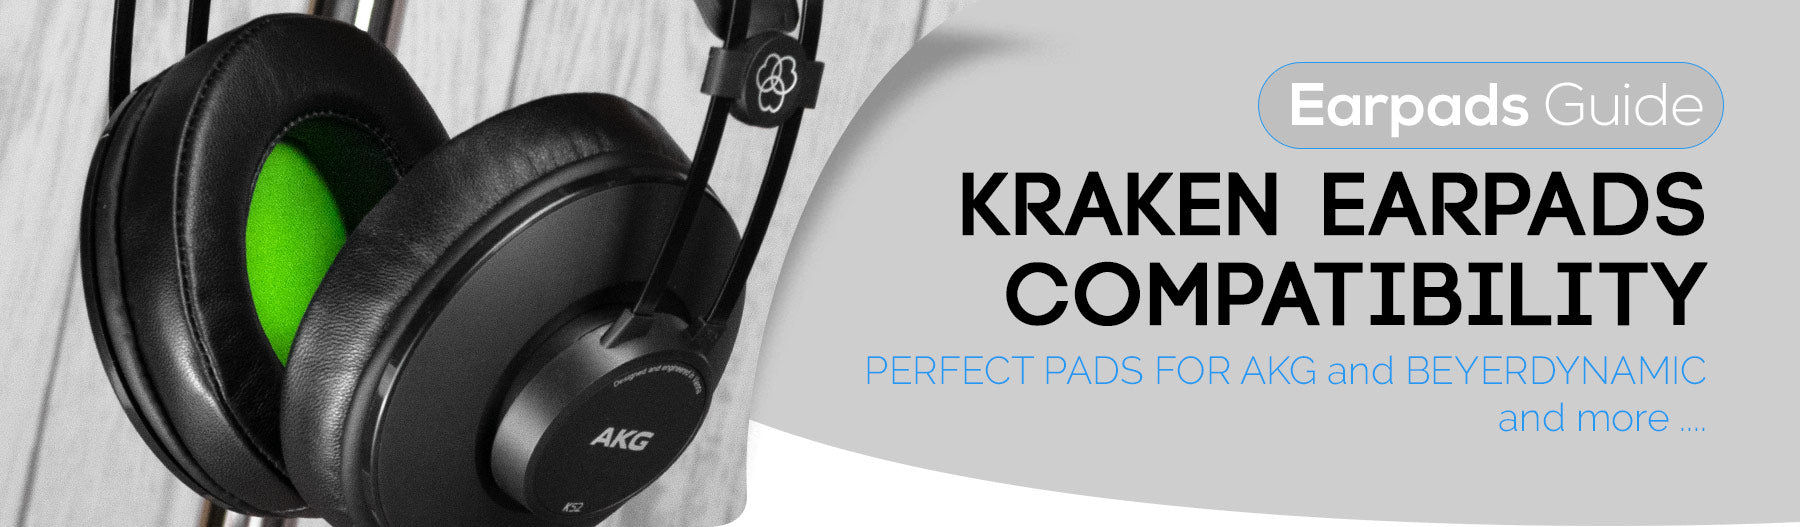 Best ear pads for AKG, Beyerdynamic and more.